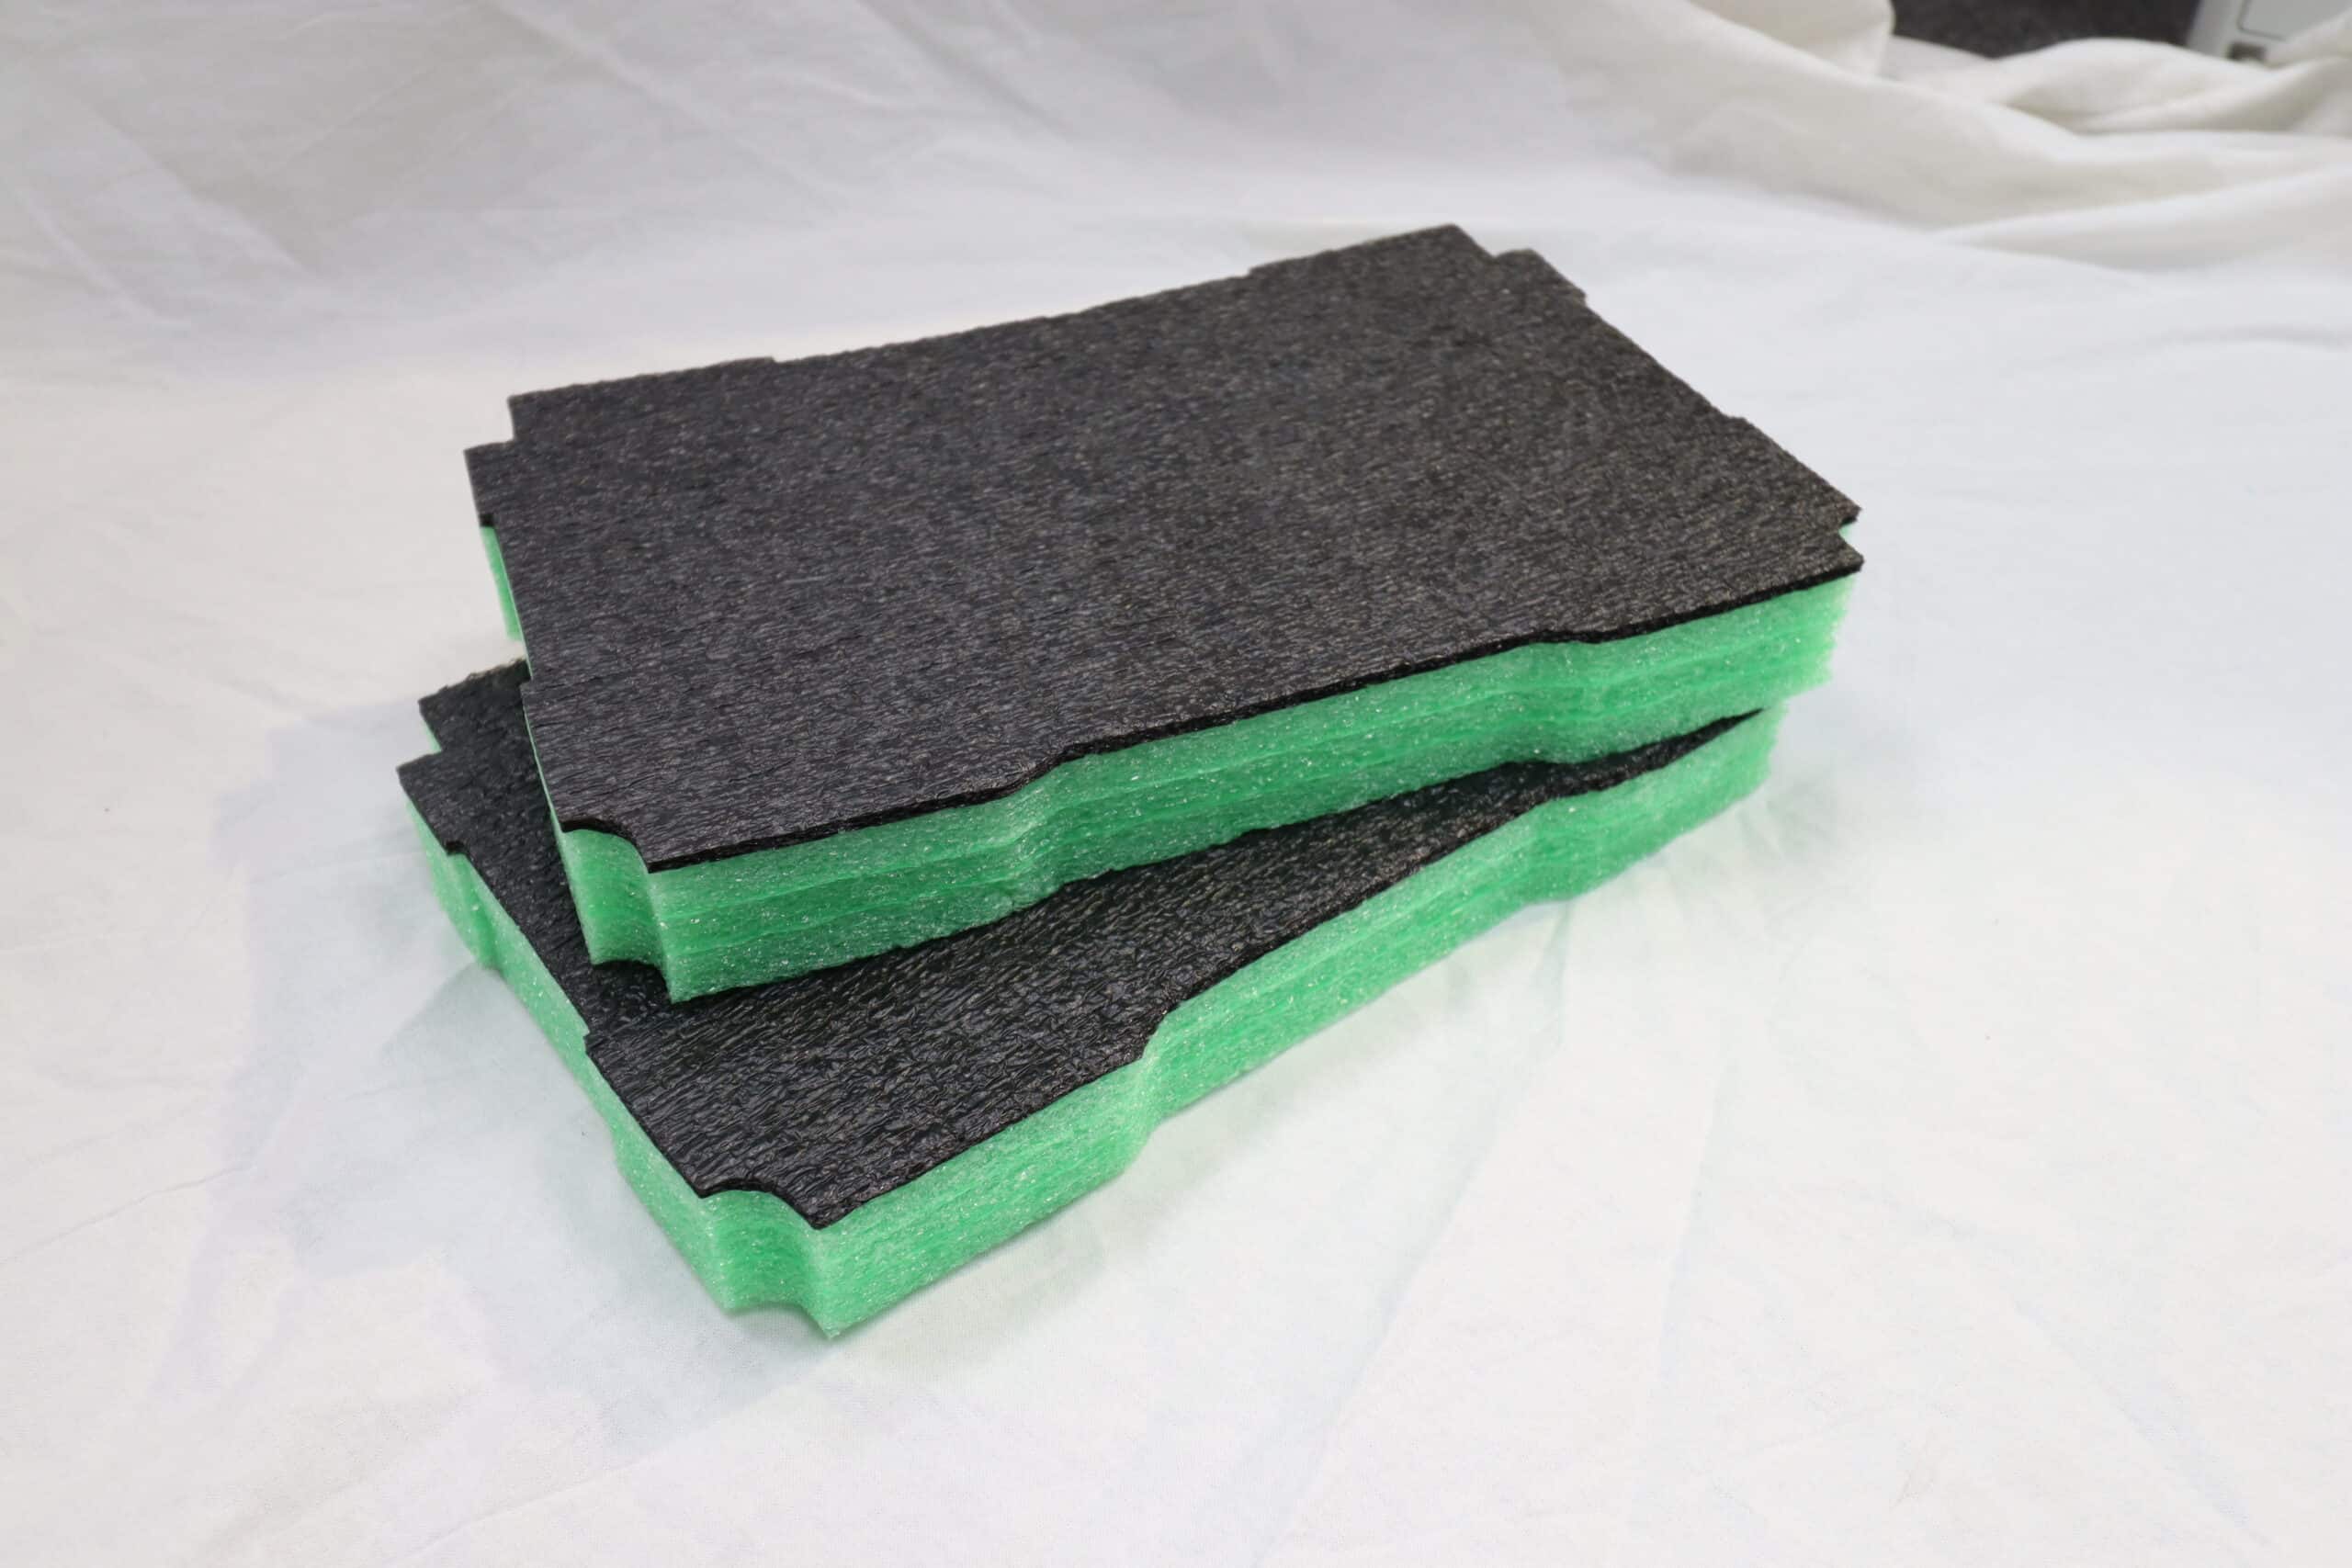 Pre-cut foam inserts to fit your toolbox.  These are in green and black to complement the Festool branding.